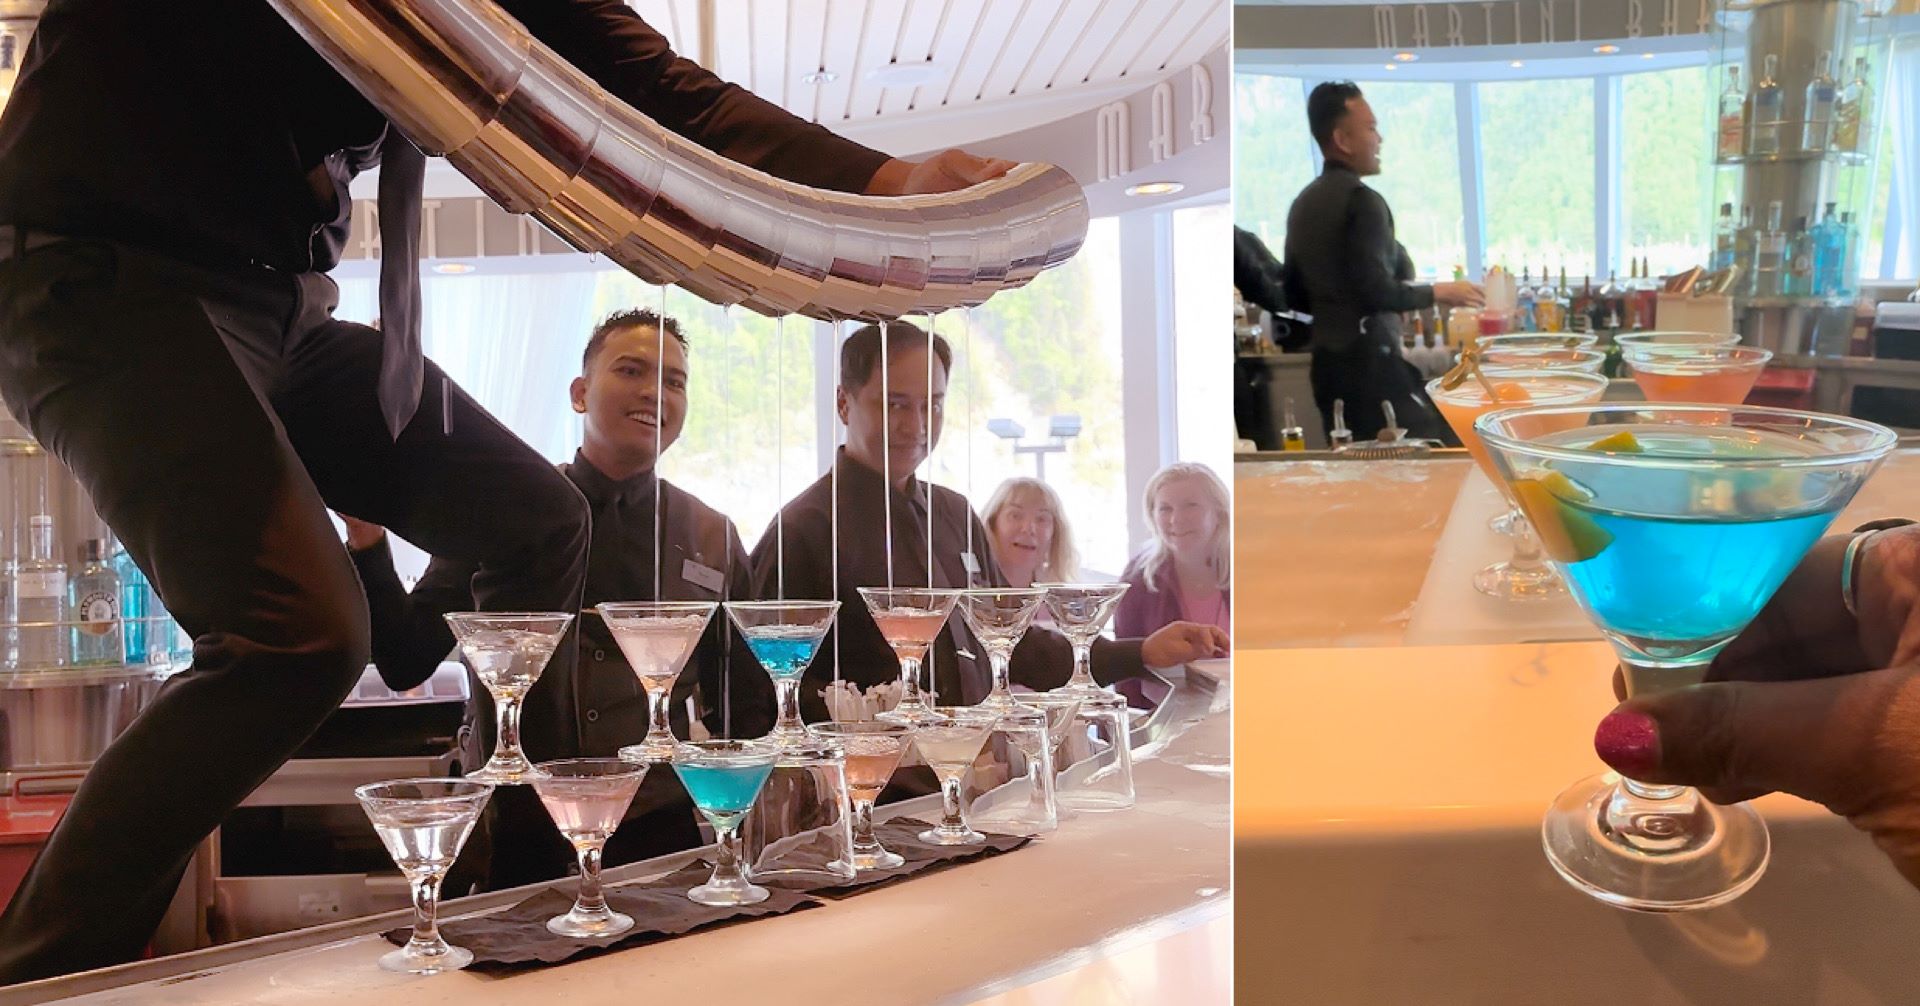 An image of the Martini Bar show and Ariel holding a mini martini.